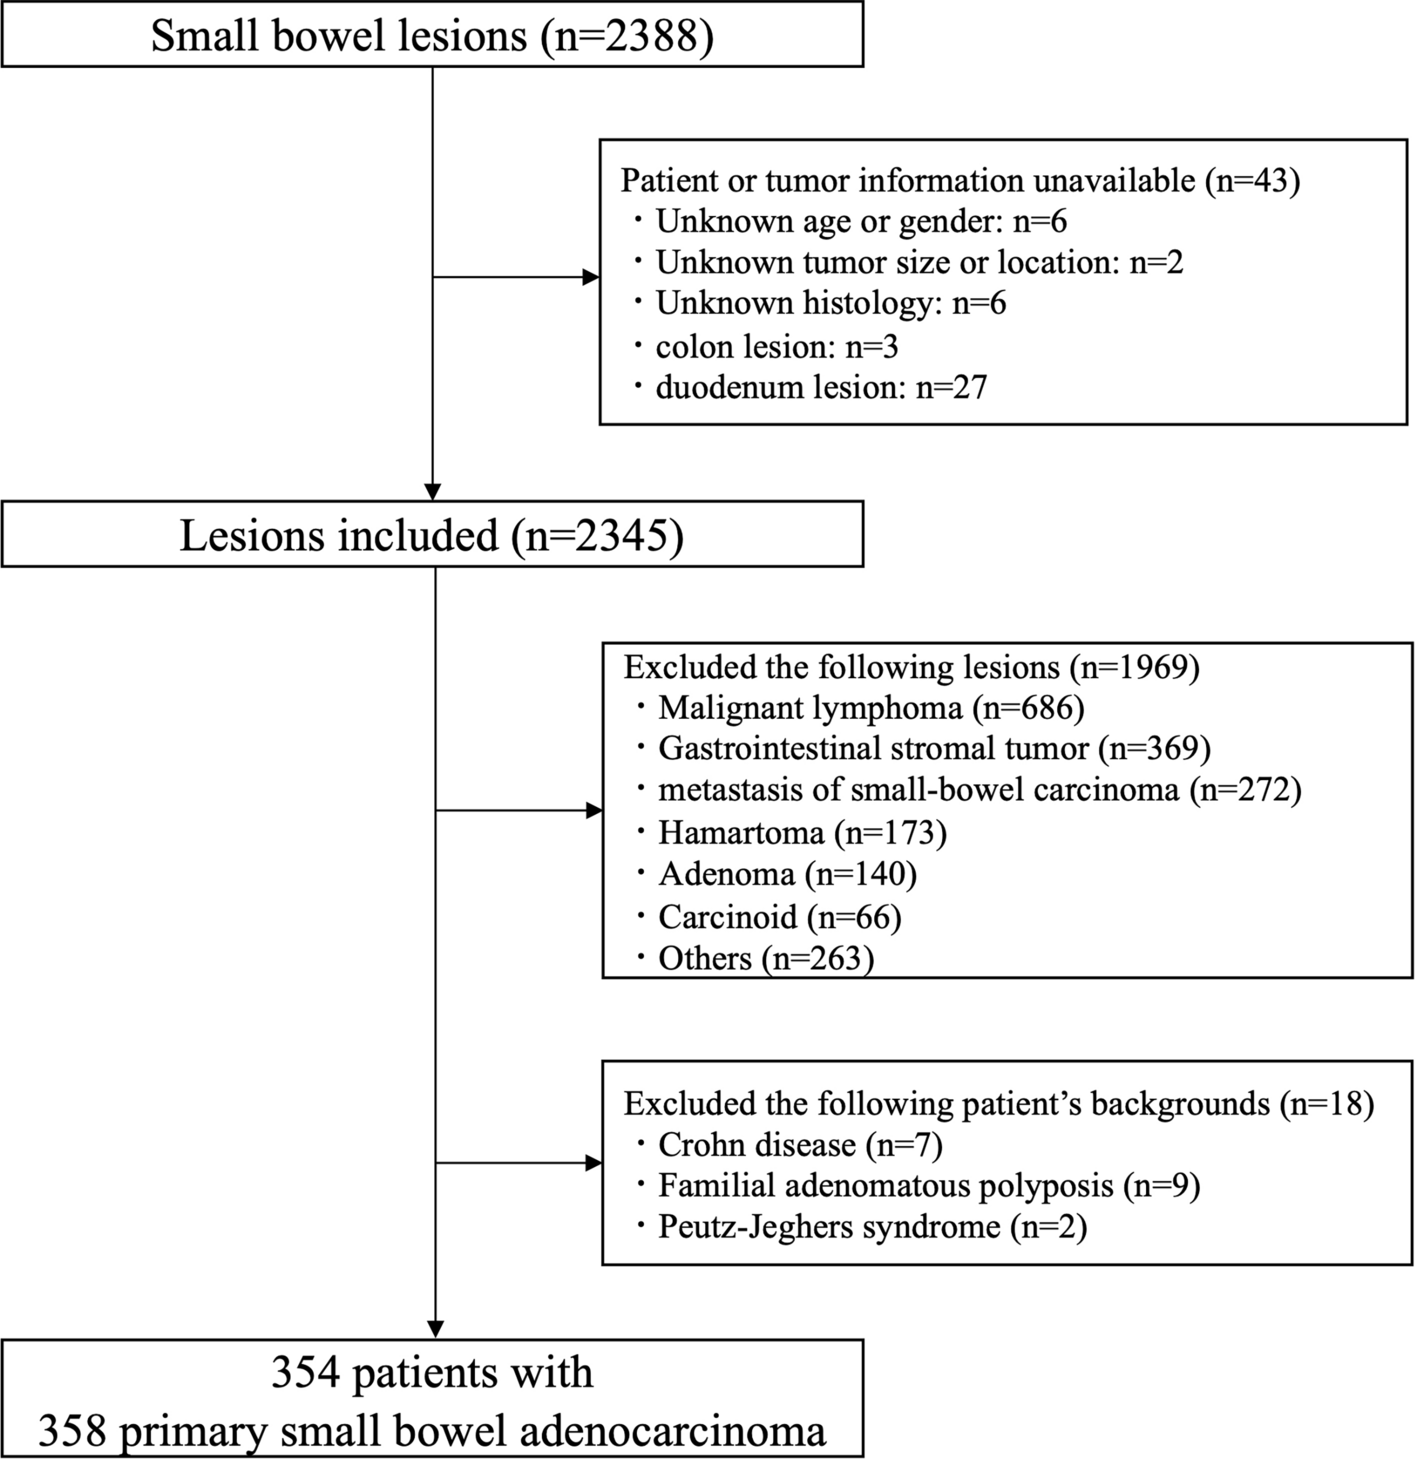 Clinicopathological features and prognosis of primary small bowel adenocarcinoma: a large multicenter analysis of the JSCCR database in Japan